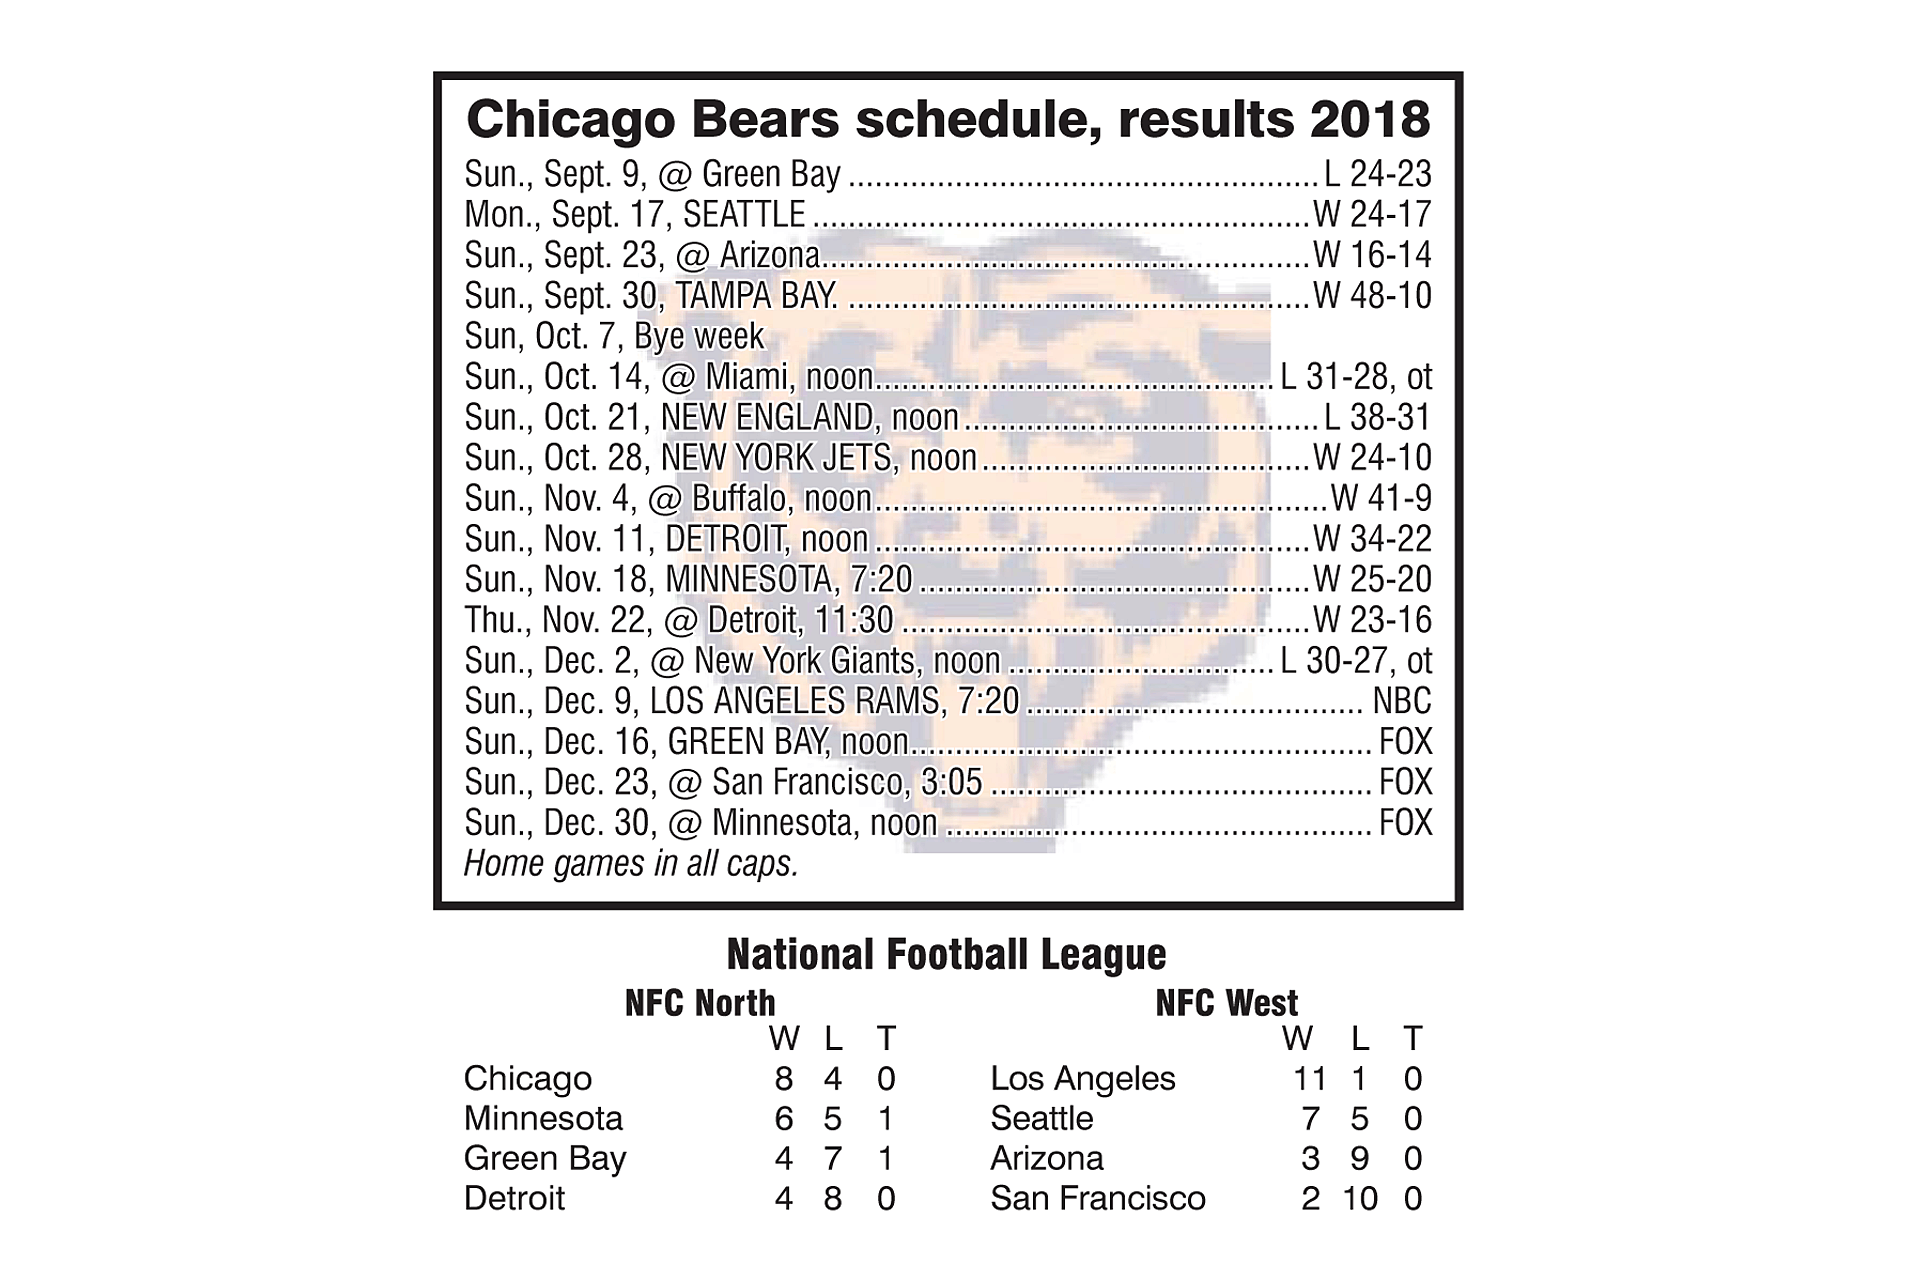 Chicago Bears 2018 schedule and results through December 2, 2018 The